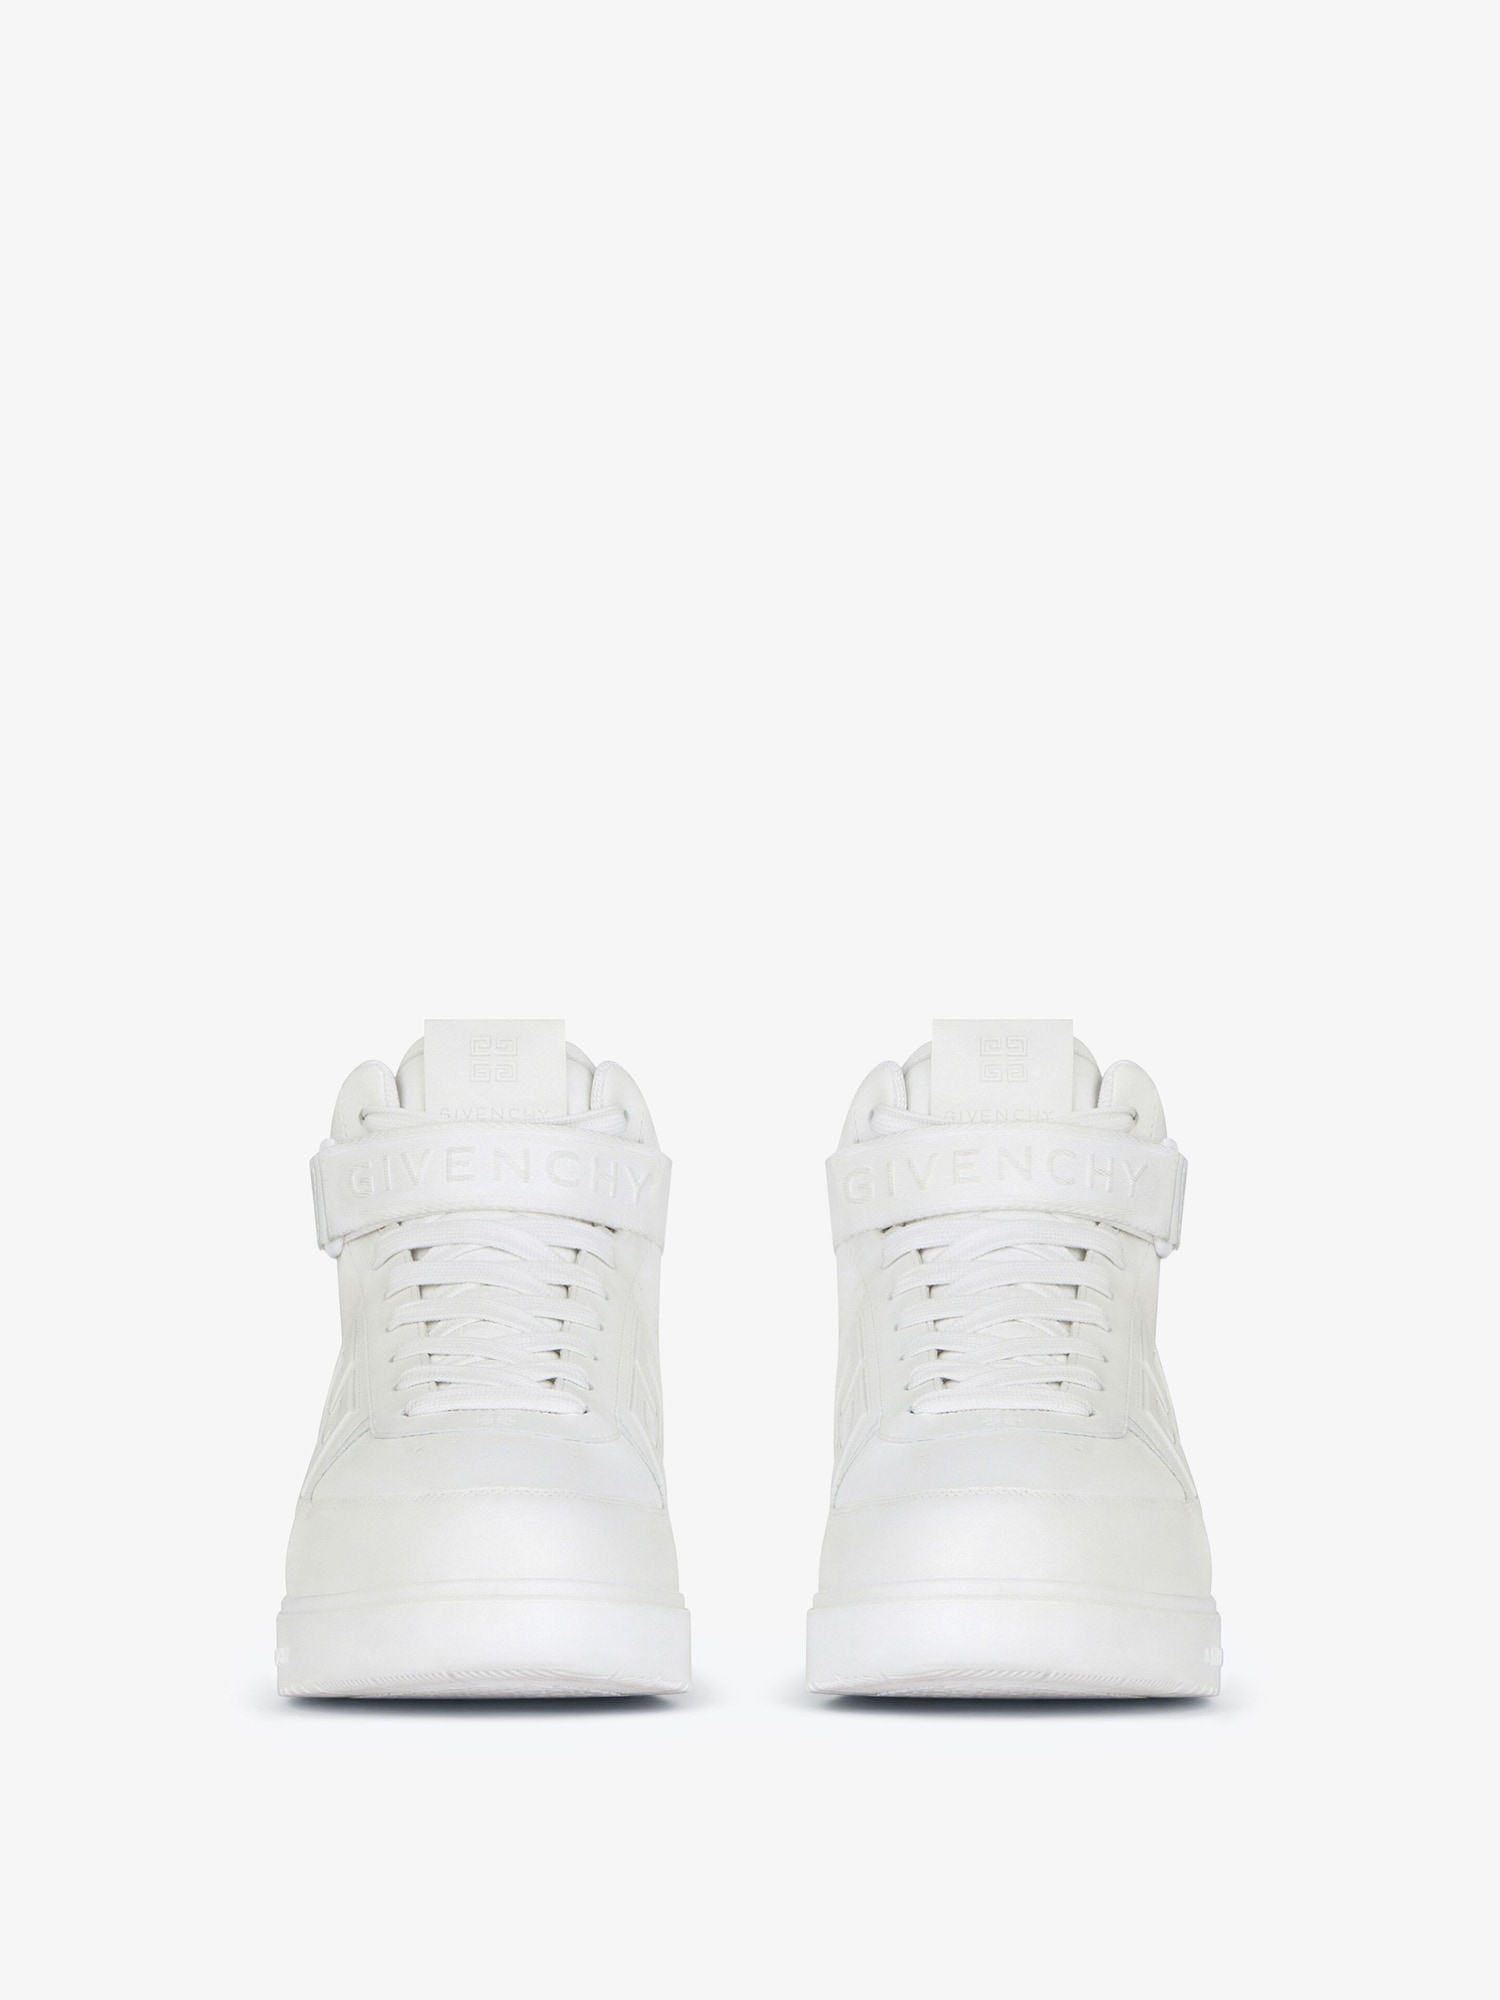 G4 high top sneakers in leather - white | Givenchy US